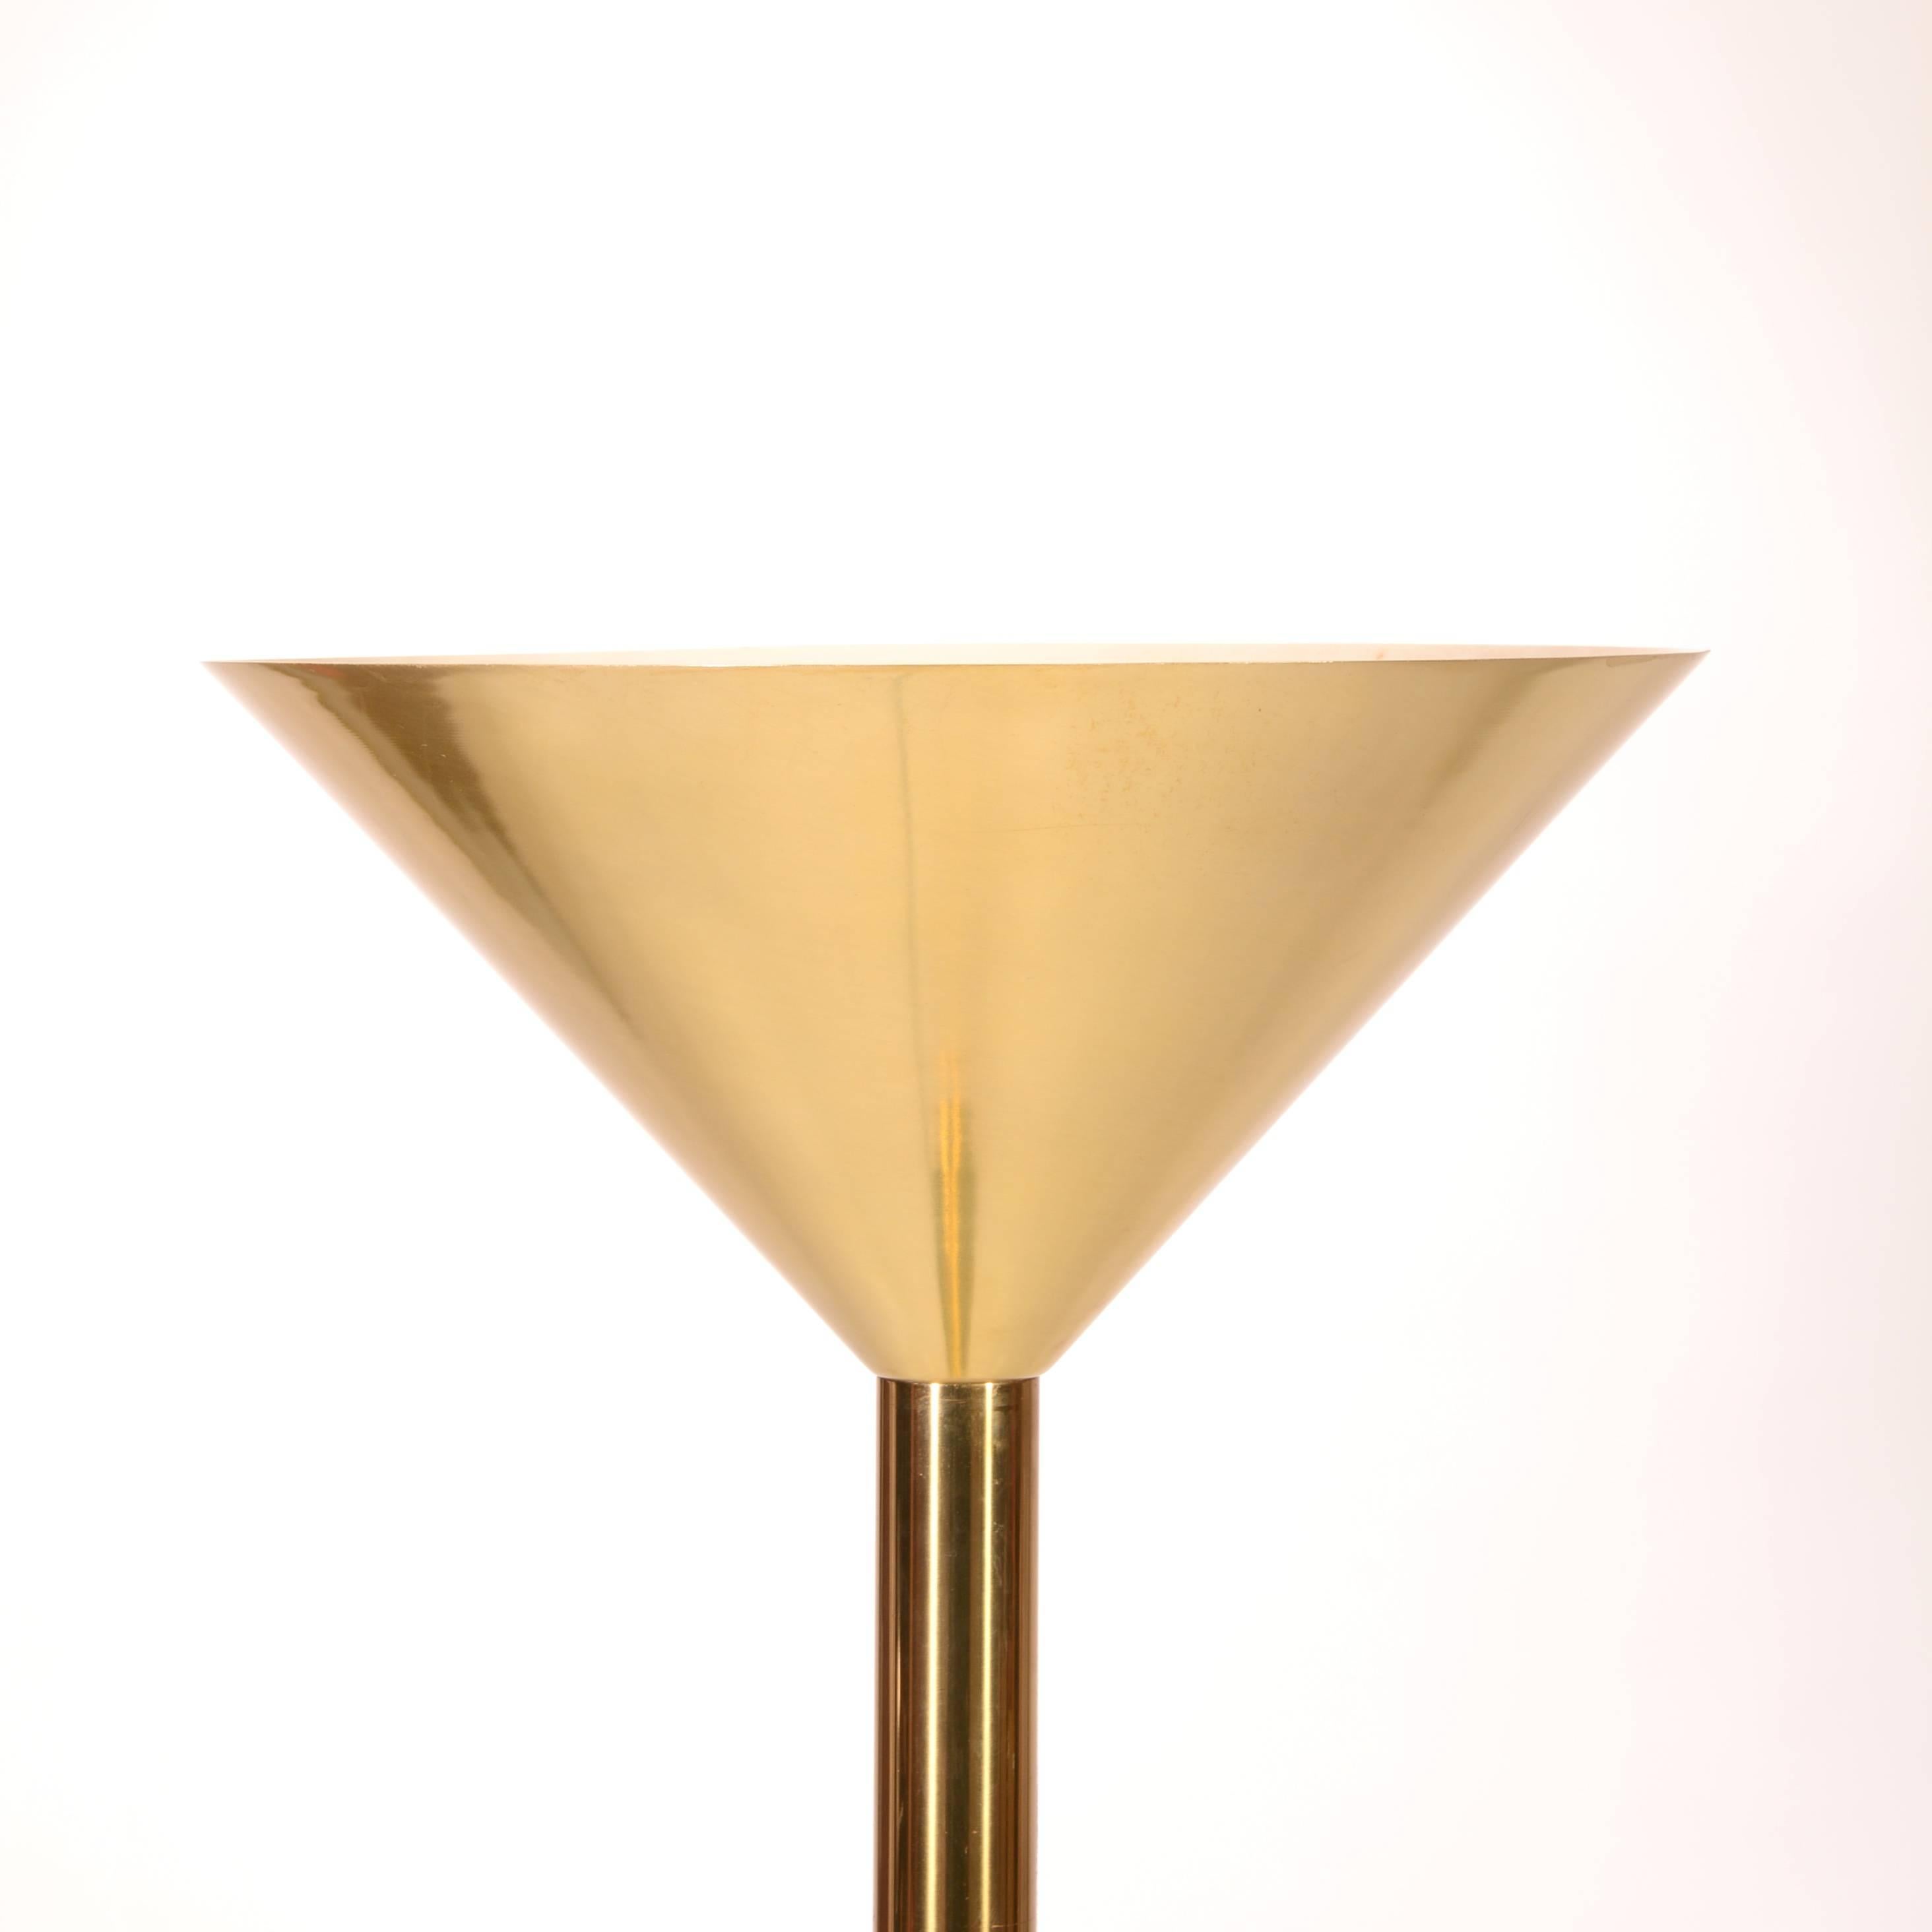 This is an amazing 1970's brass floor lamp by Nessen.  